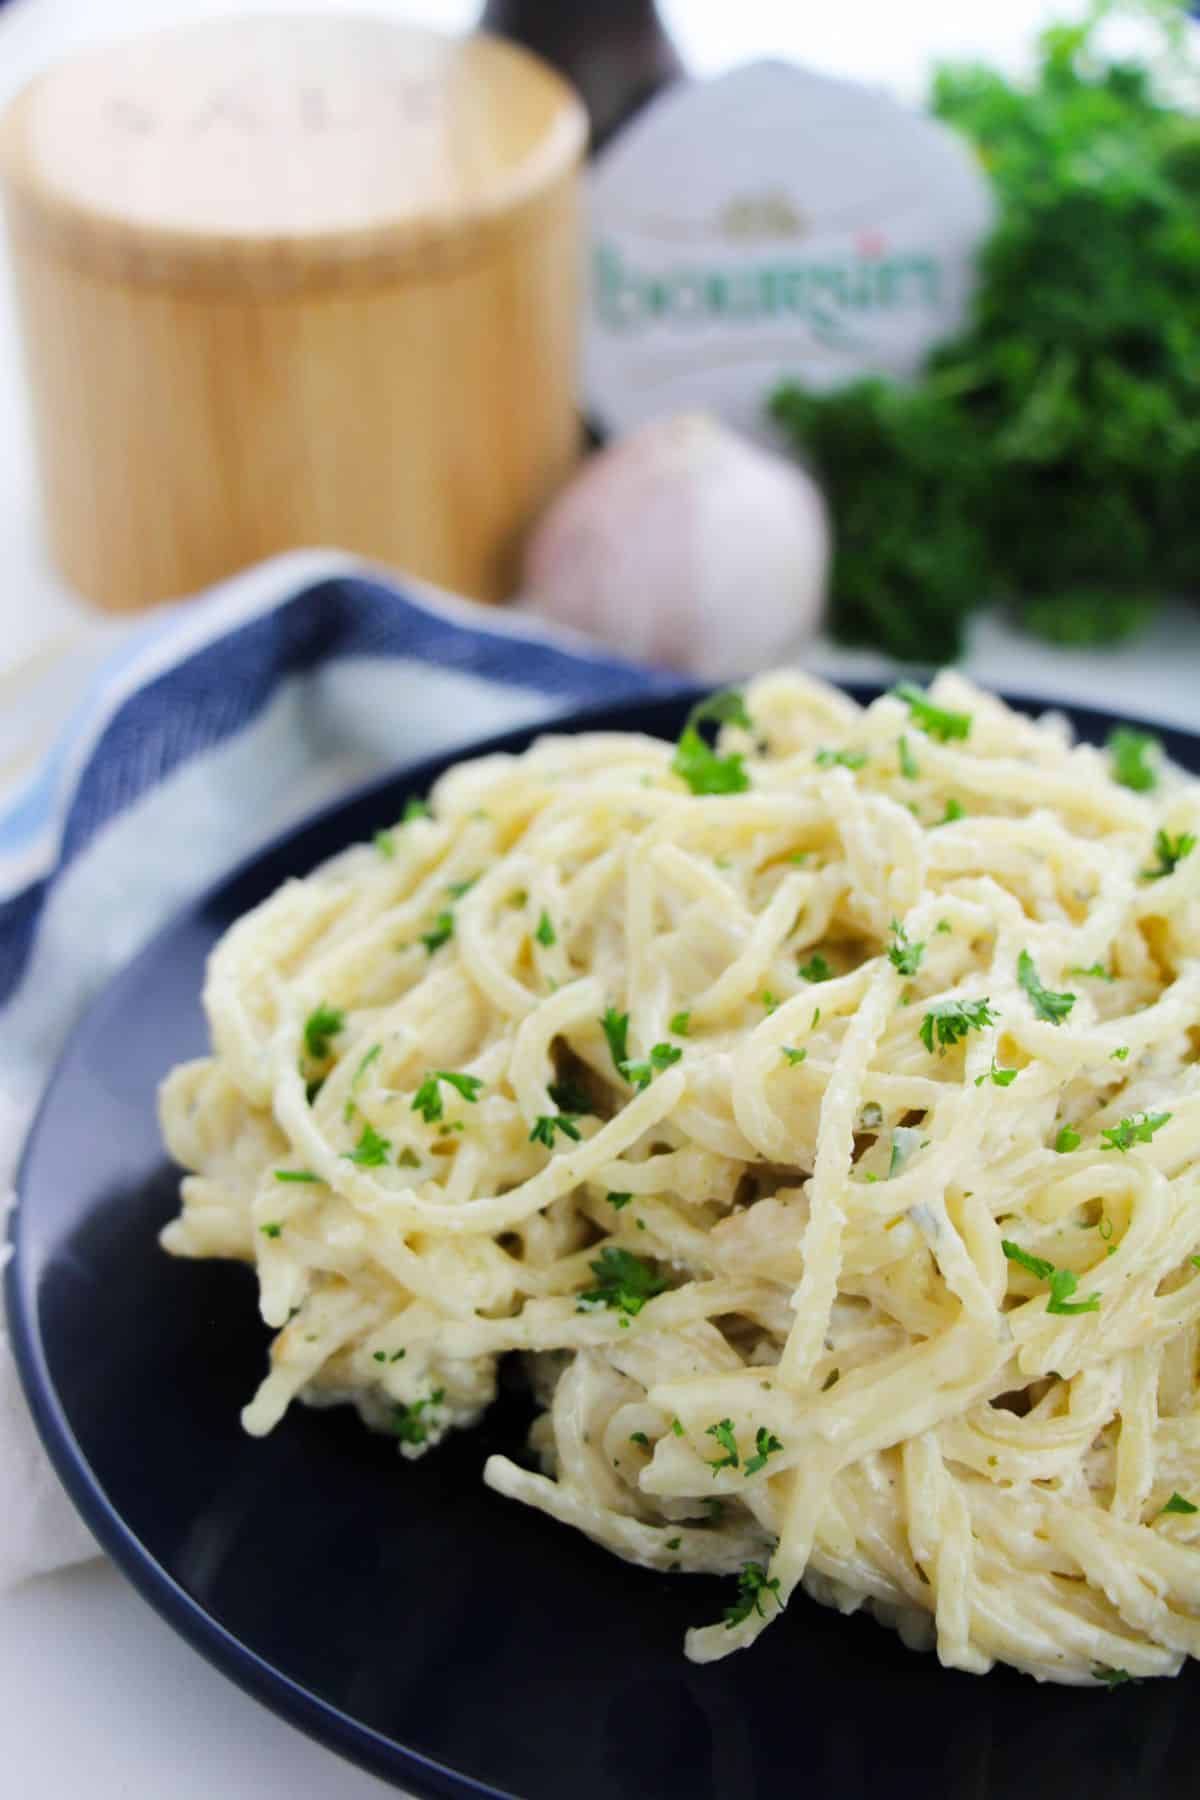 Boursin Cheese Pasta on a serving plate, garnished with parsley and ingredients on the side.